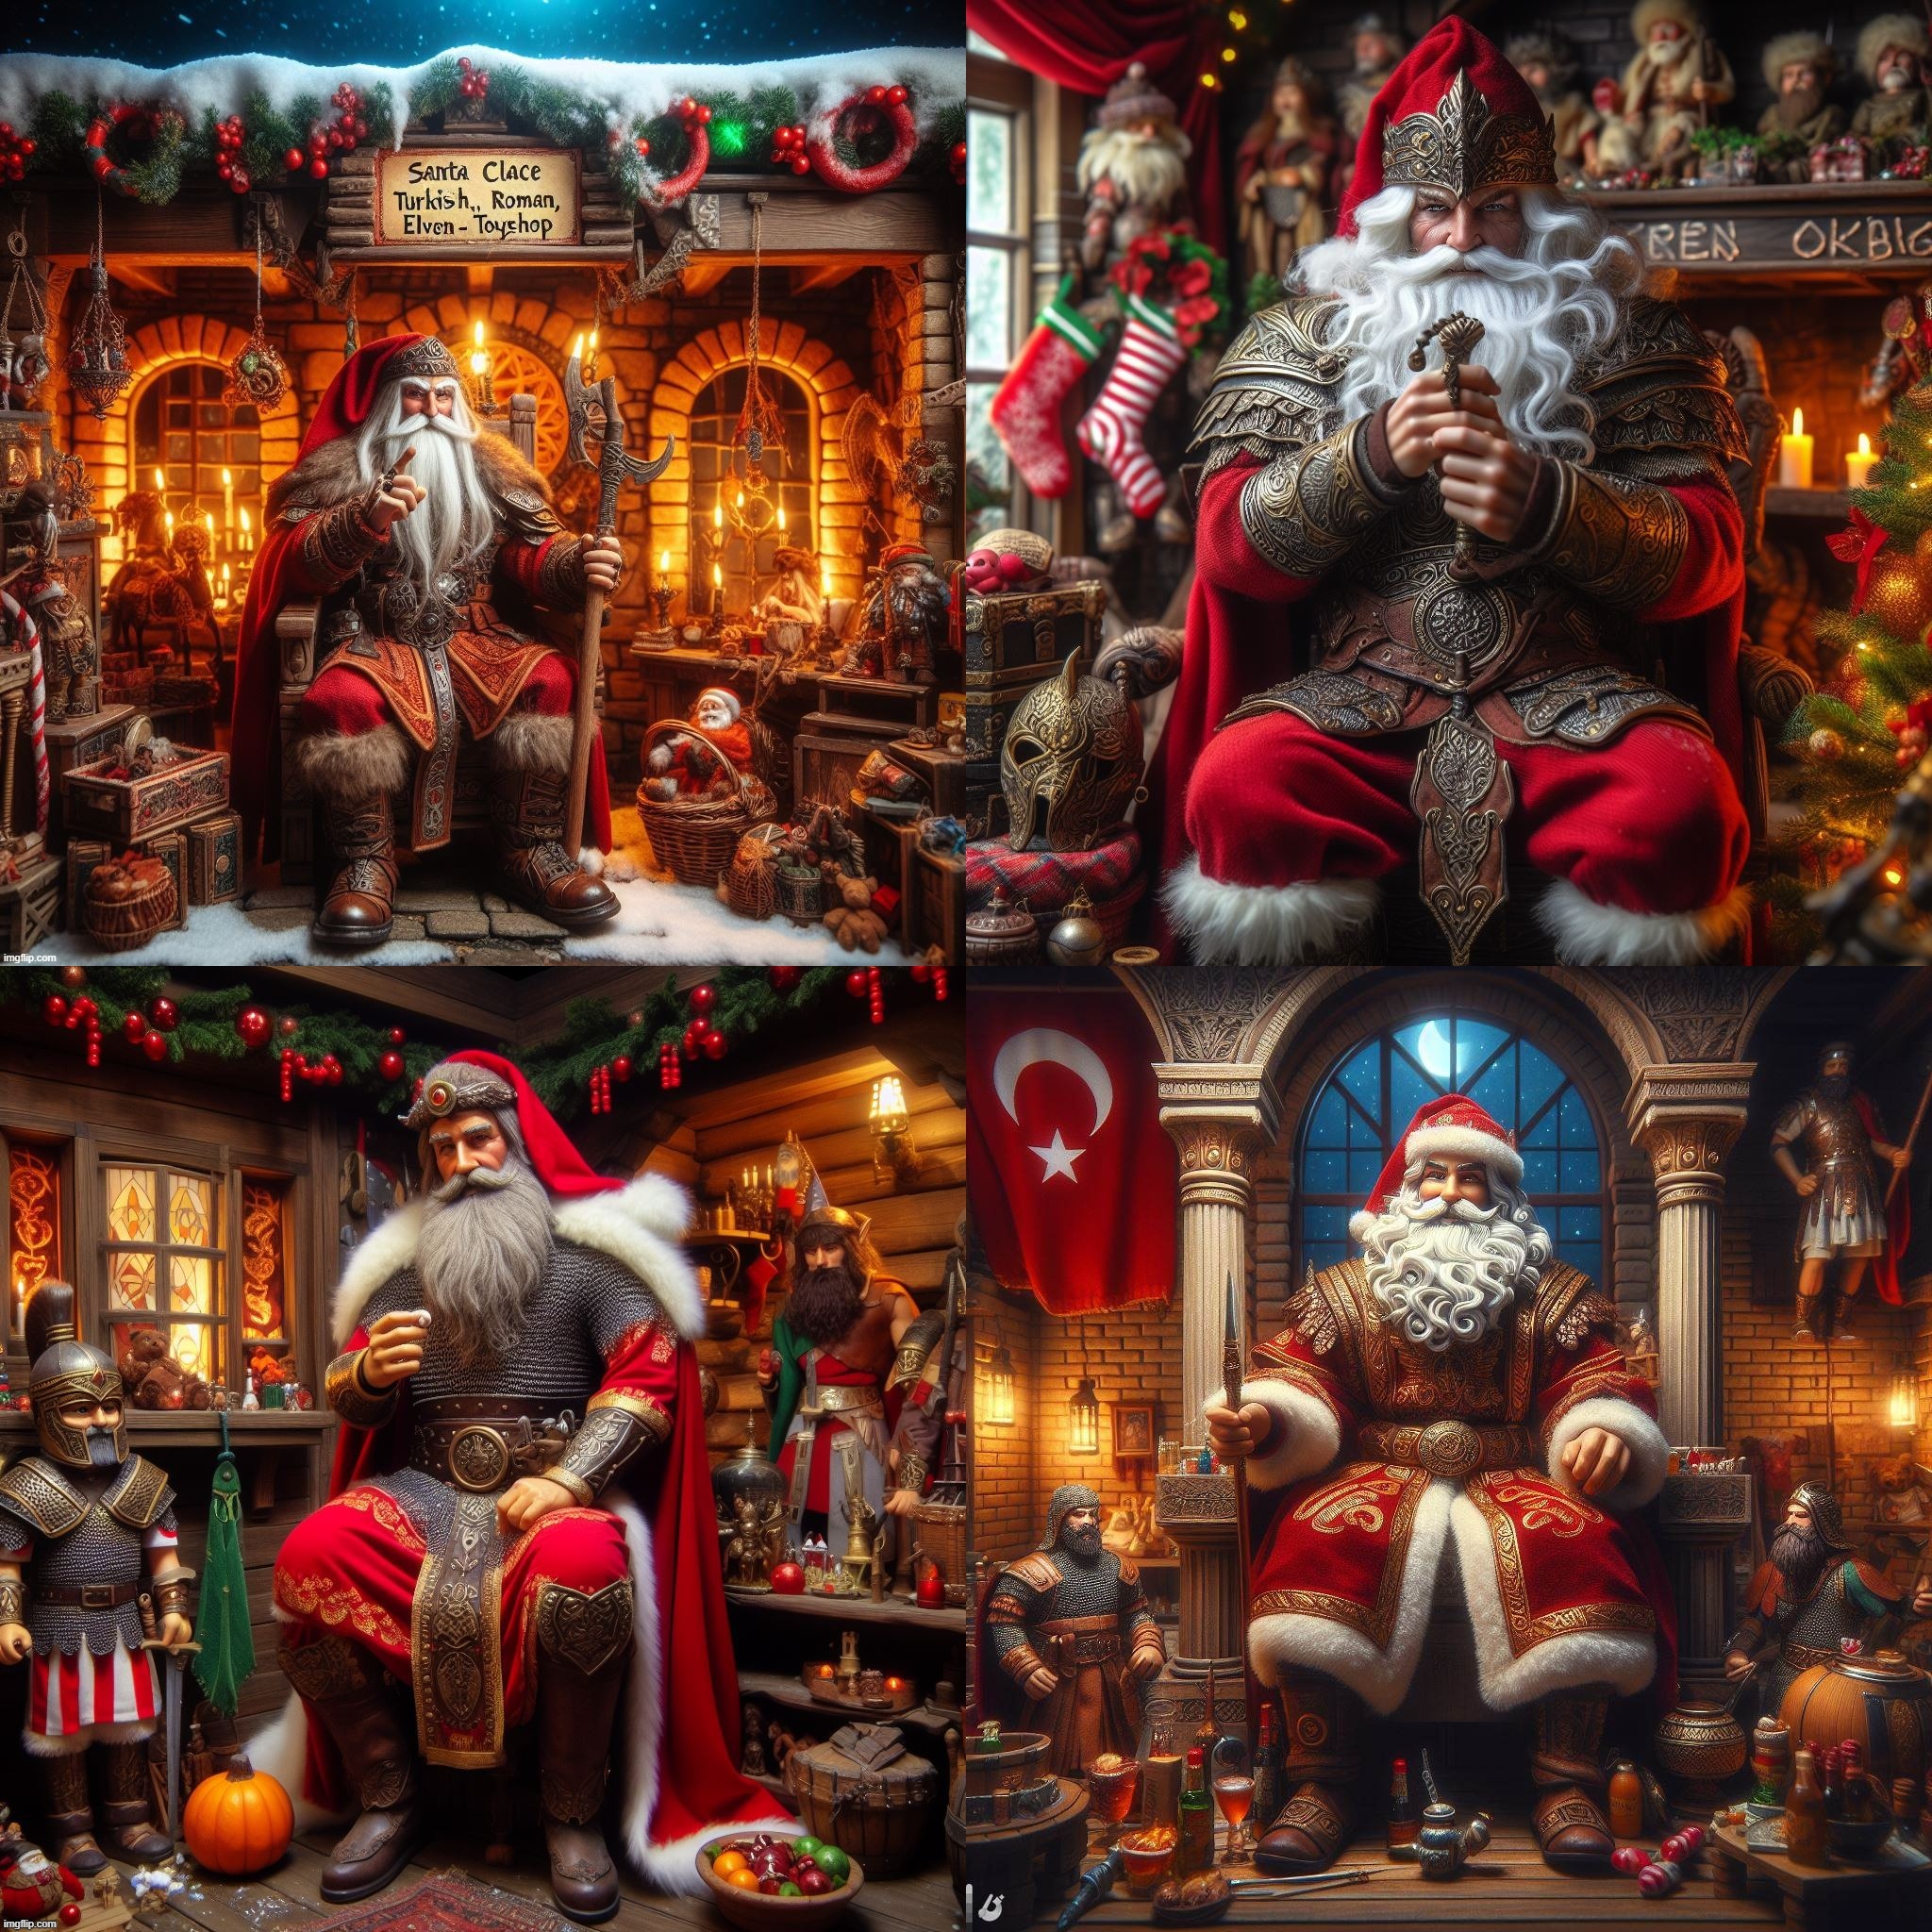 AI Bing: Turko RomanElf (Santa influenced by Turkish, Roman, and Elven aesthetic). I'm happy with it. Merry Christmas! | image tagged in santa claus,ai generated,turkish,elves,roman,fantasy | made w/ Imgflip meme maker